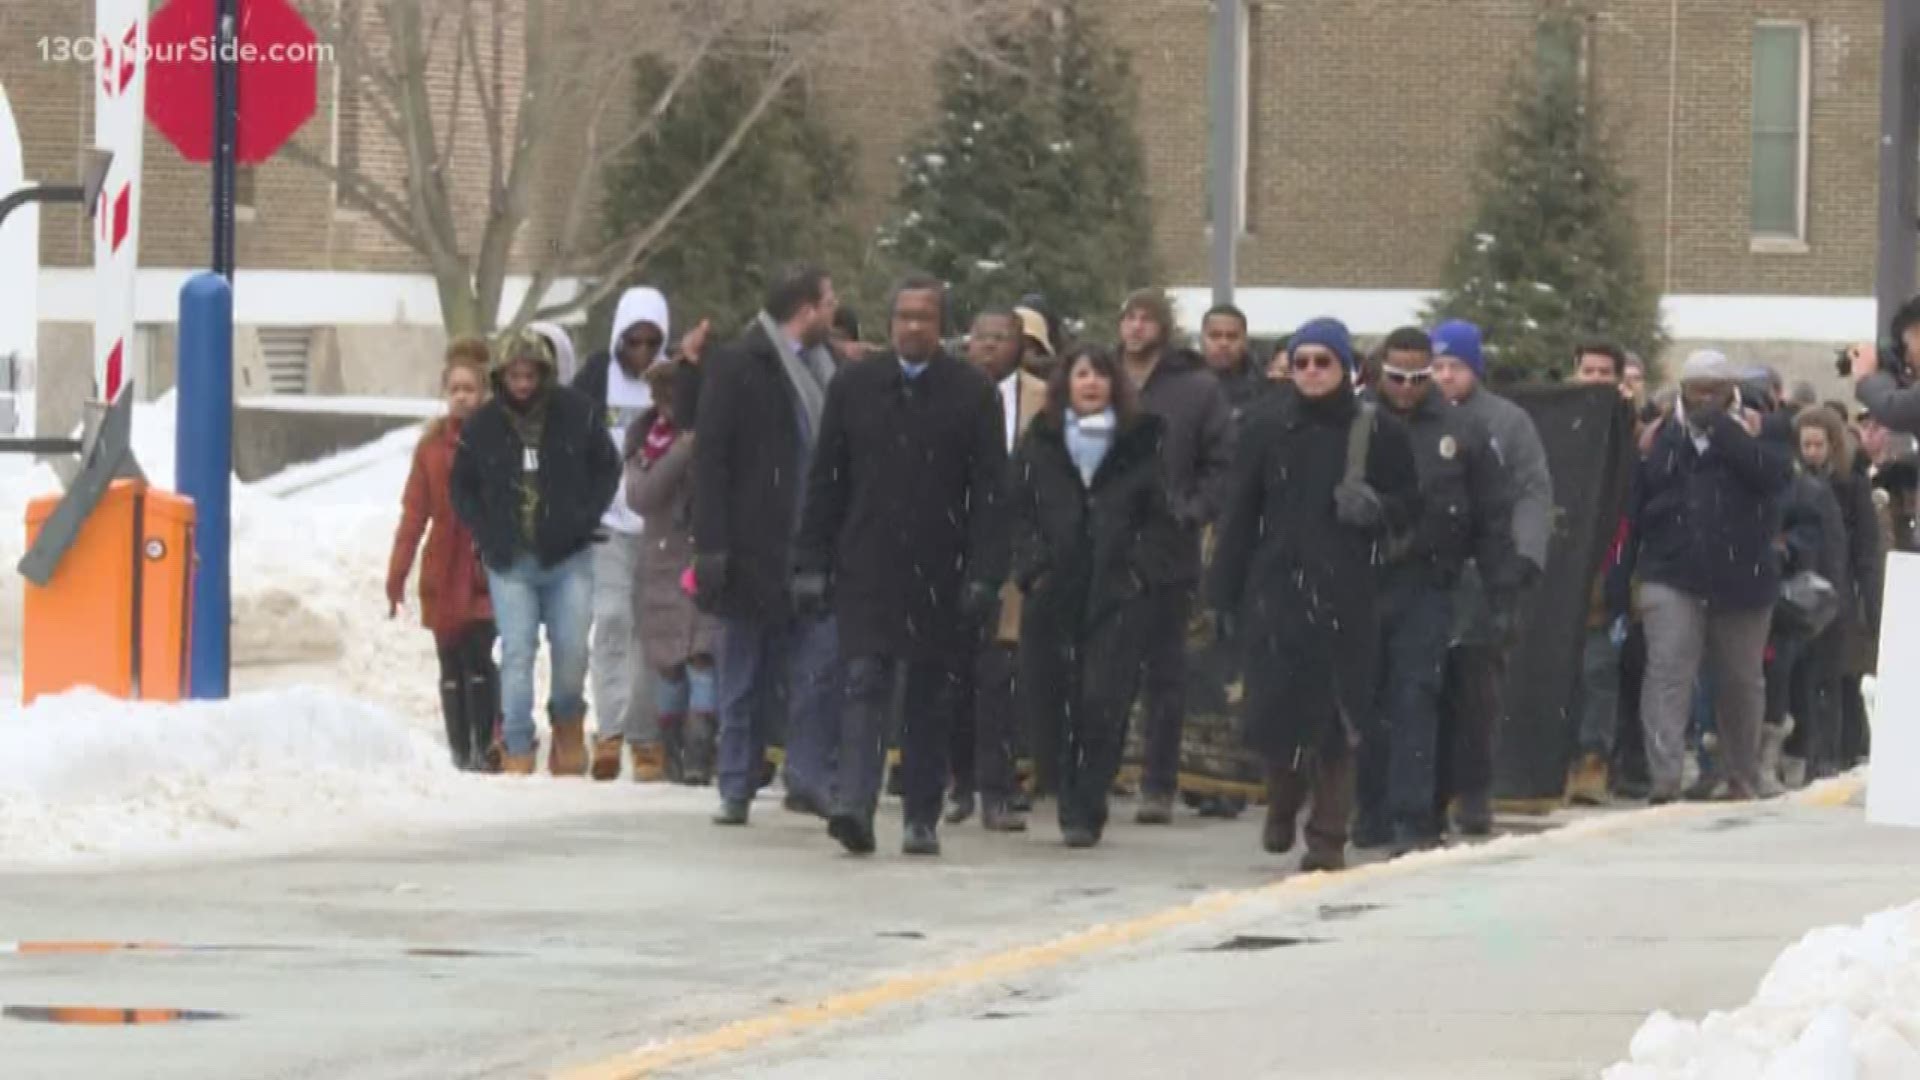 Grand Valley State University kicked off a week of events to honor Martin Luther King Jr.